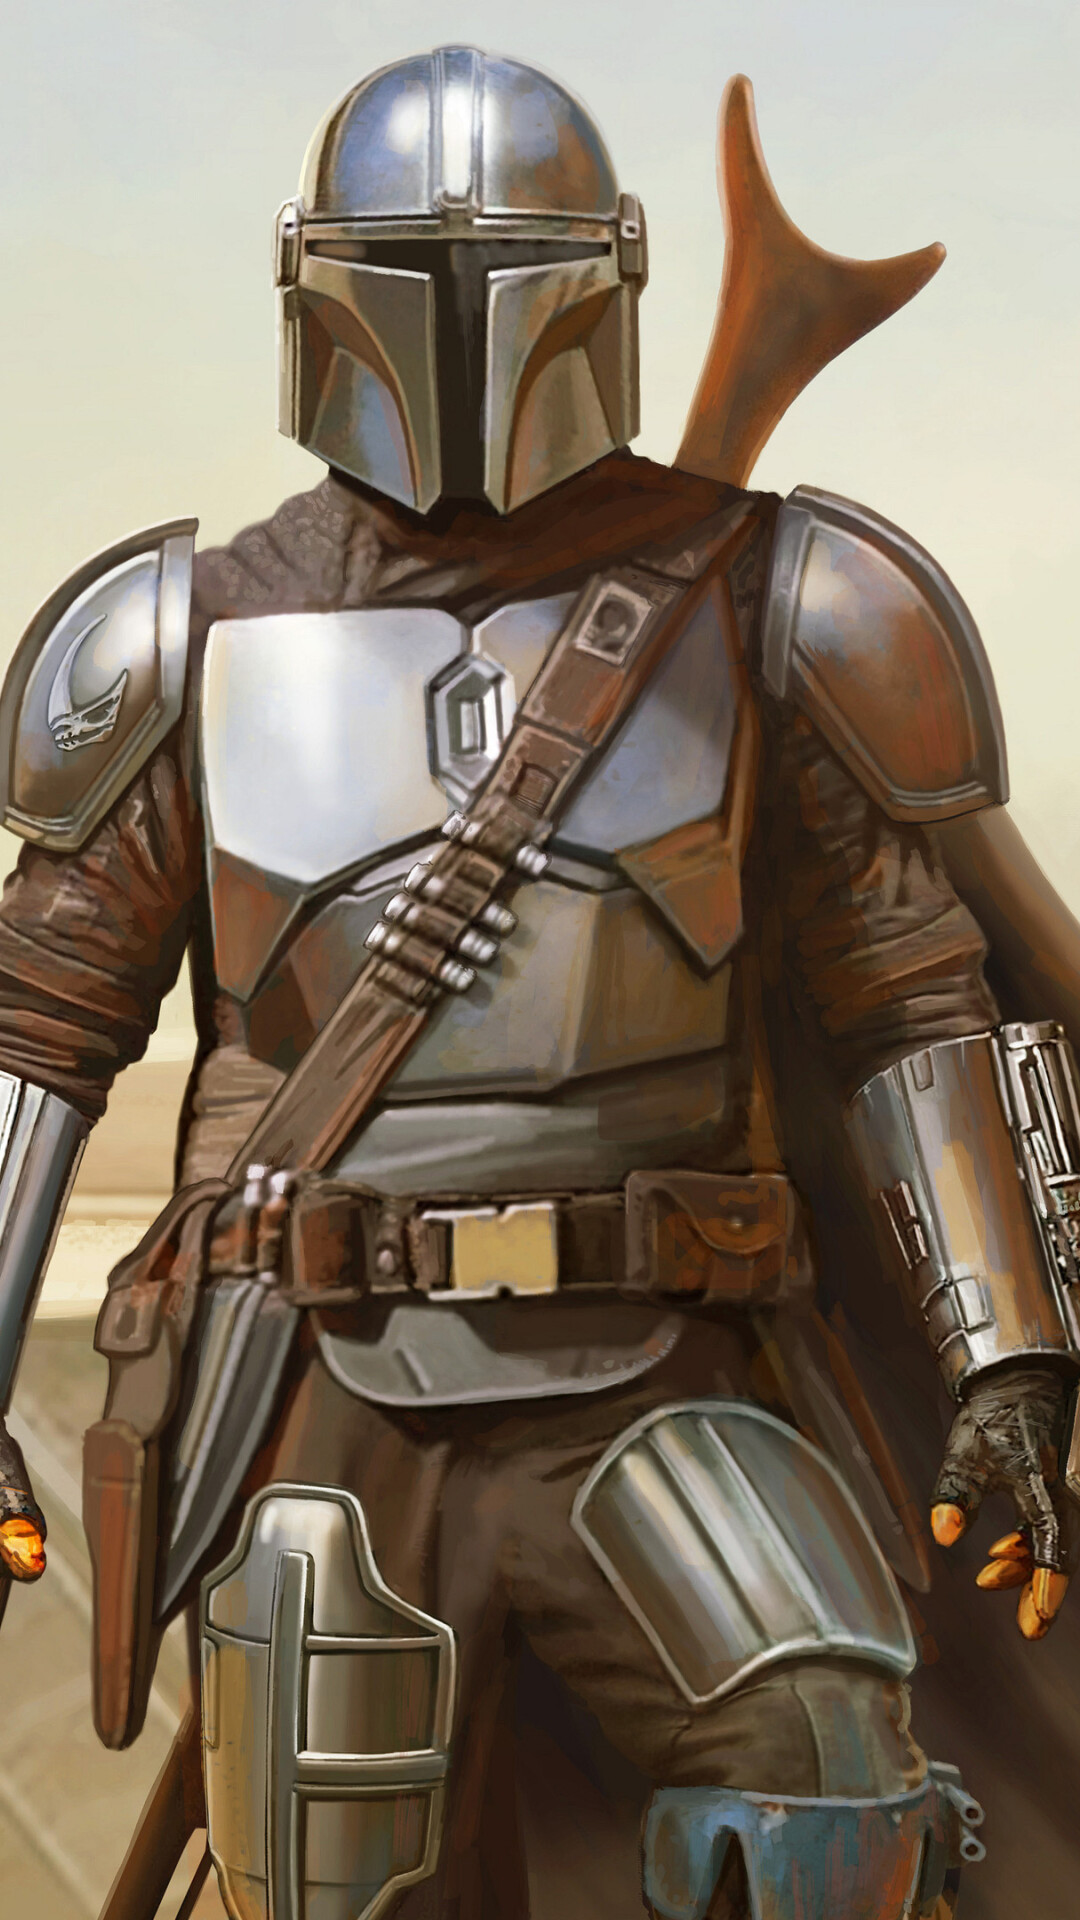 The Mandalorian: A Space Western series set in the Star Wars universe. 1080x1920 Full HD Background.